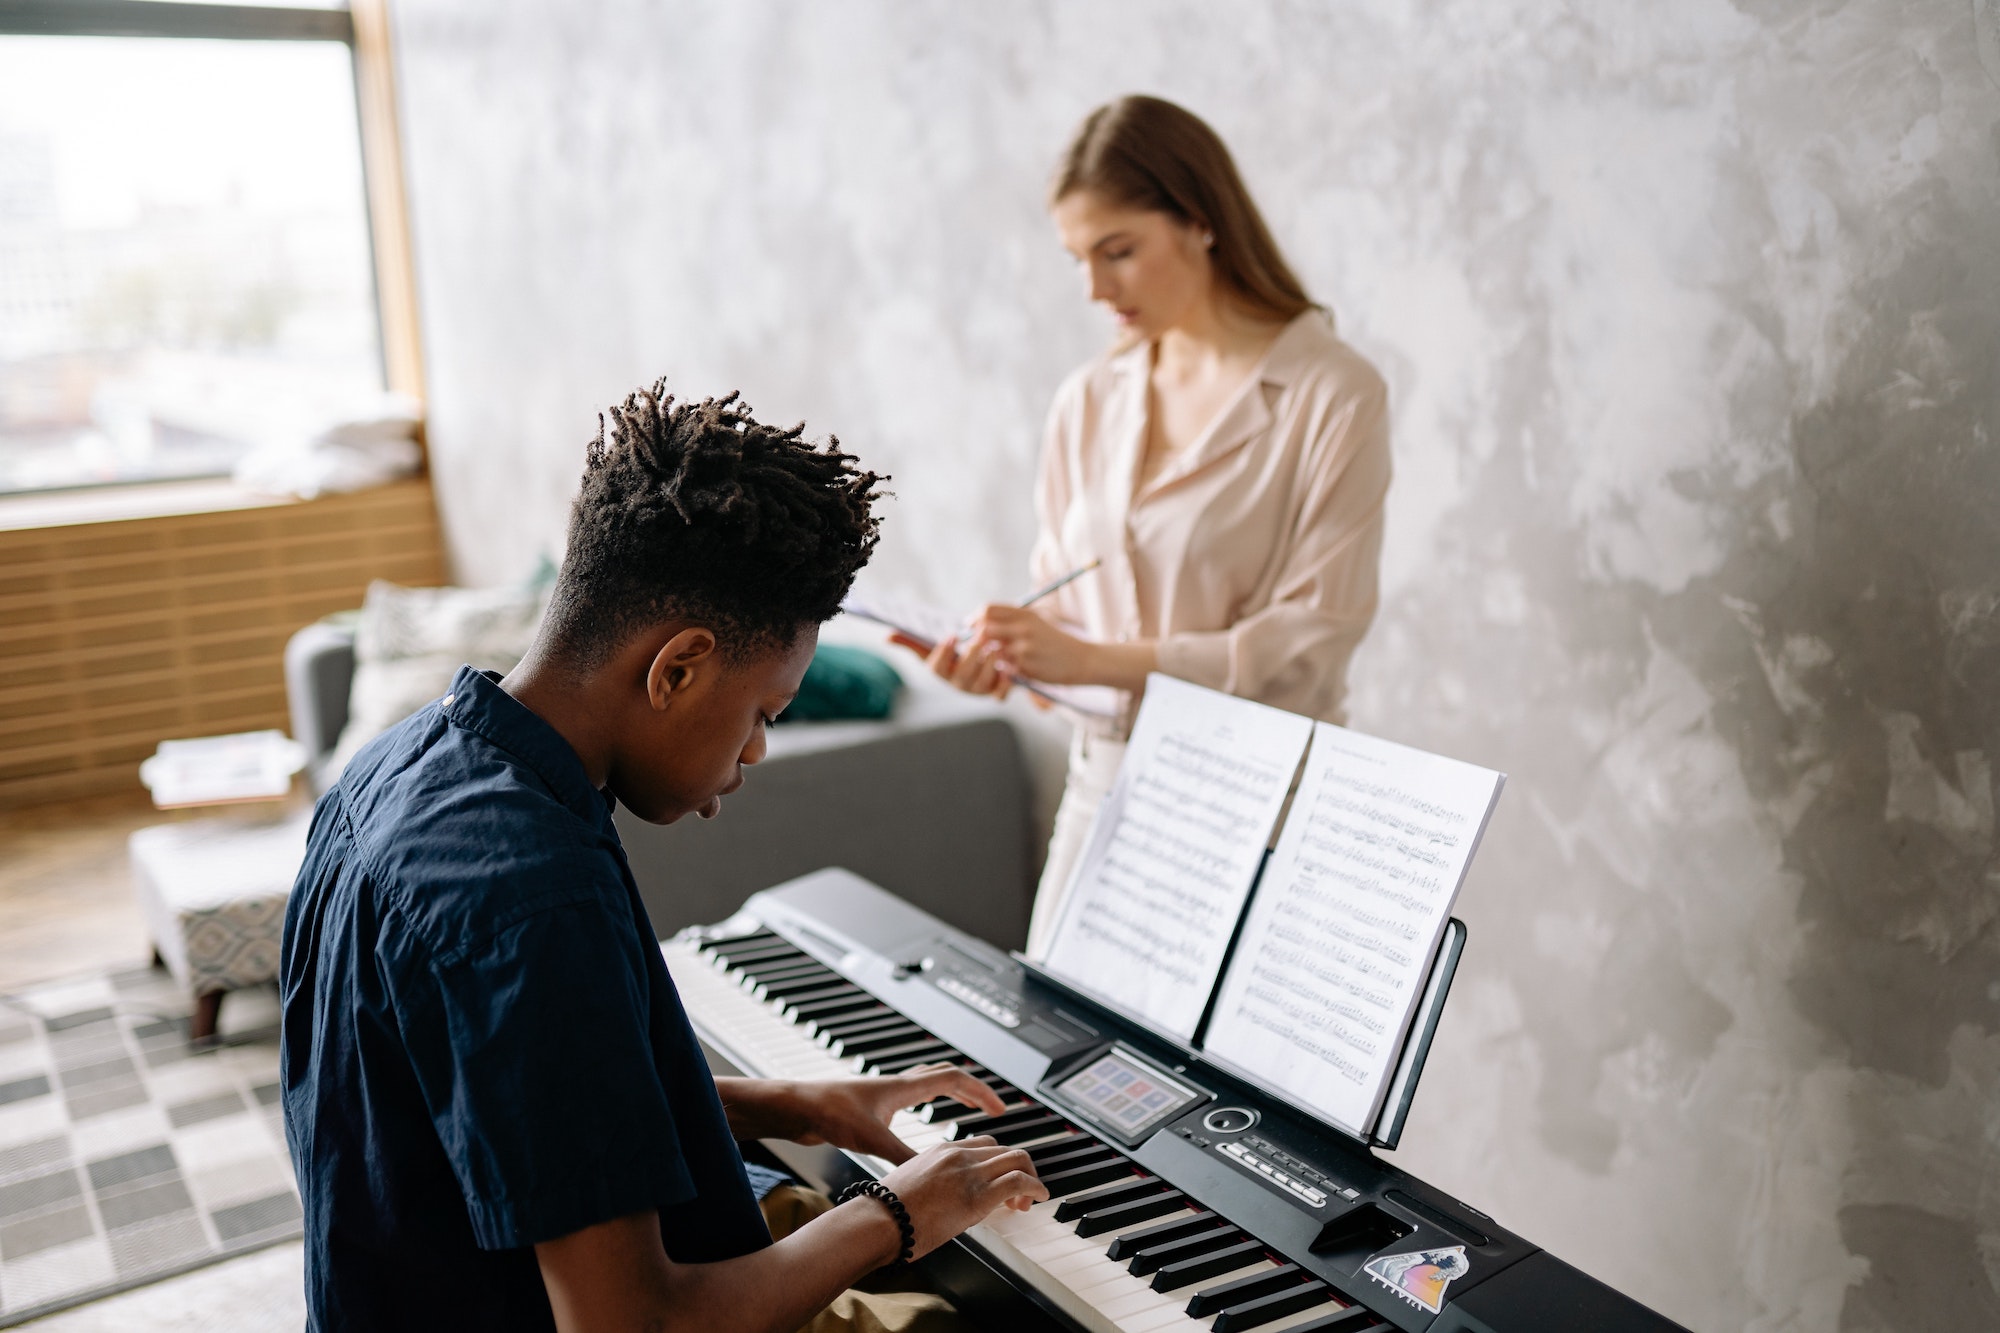 Middle school boy learning to play the piano with teacher